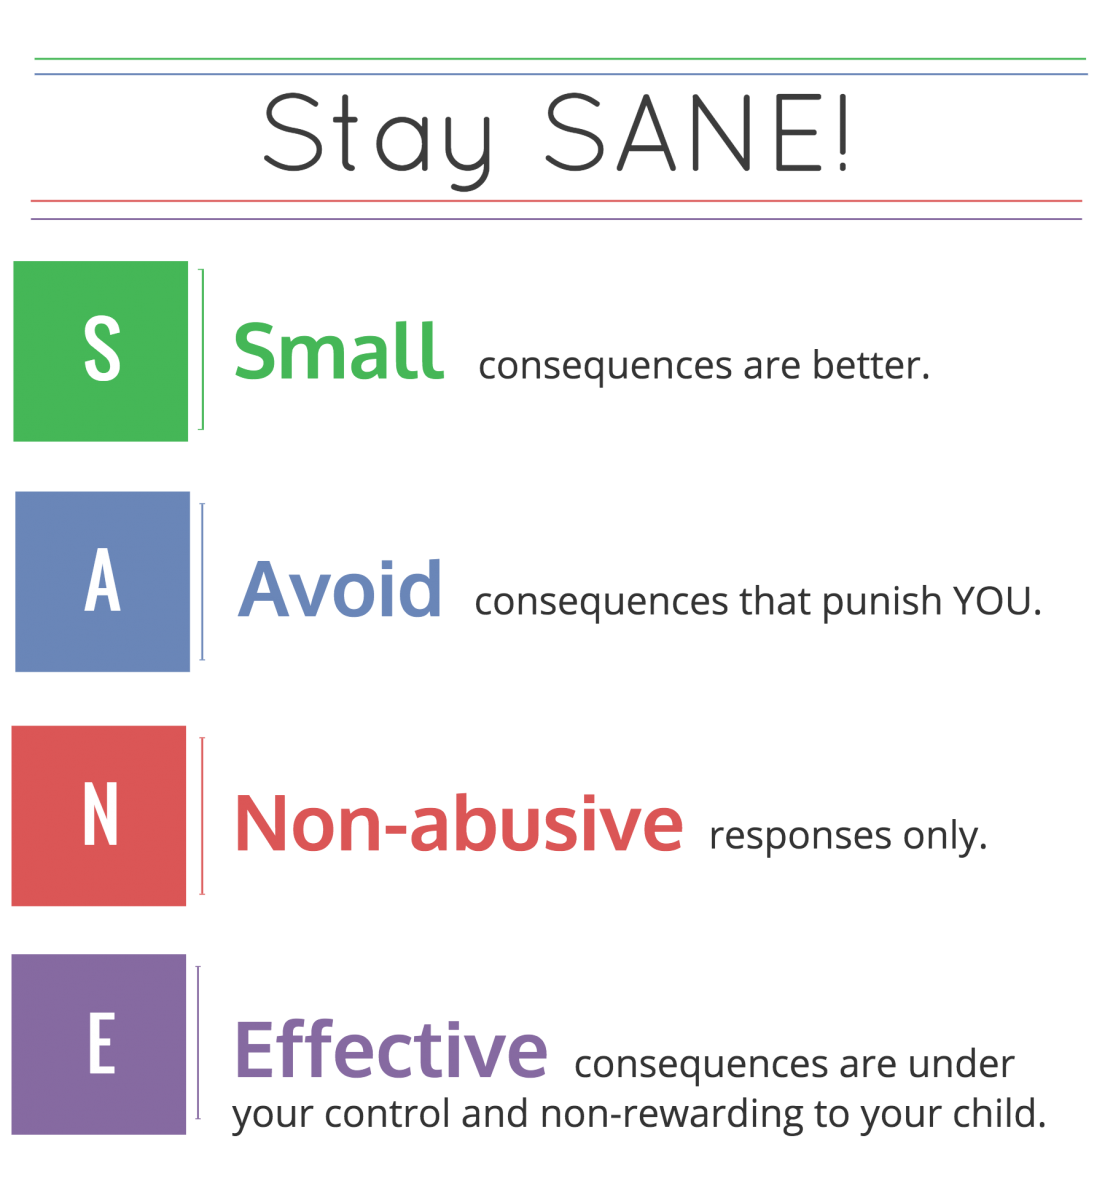 Ways to stay SANE when setting limits: Small consequences, Avoid punishing yourself, Nonabusive, Effective